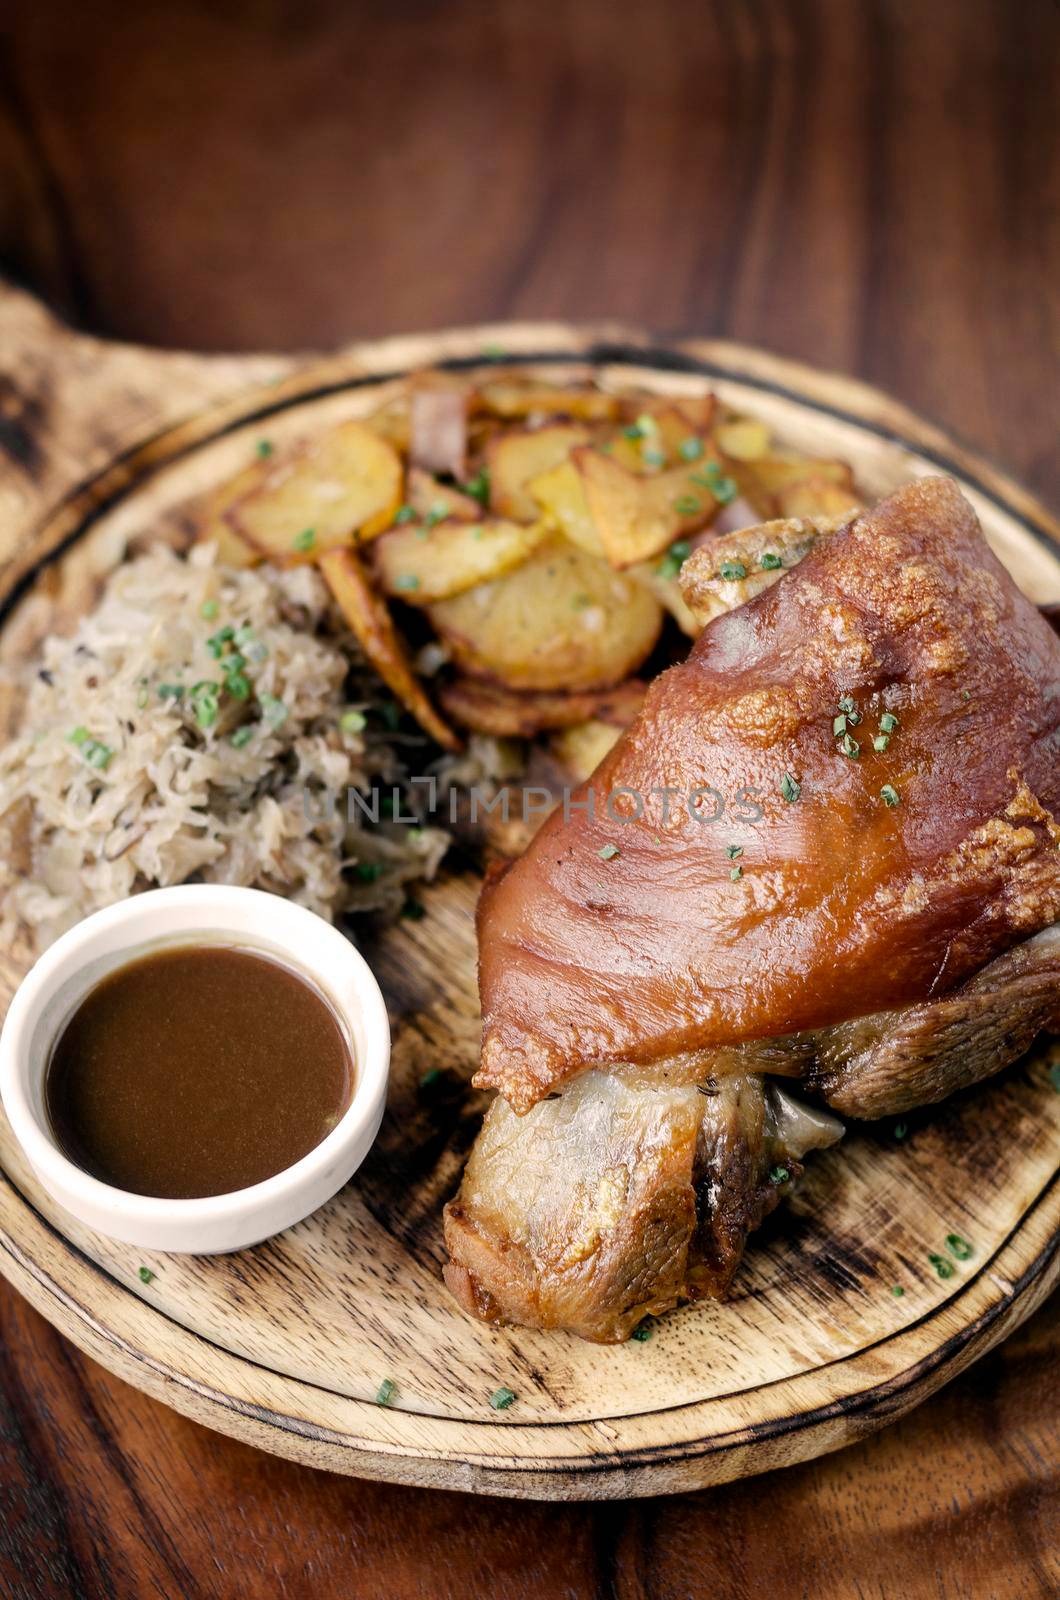 SCHWEINSHAXE traditional german pork knuckle with sauerkraut and potatoes bavarian meal on rustic wood background